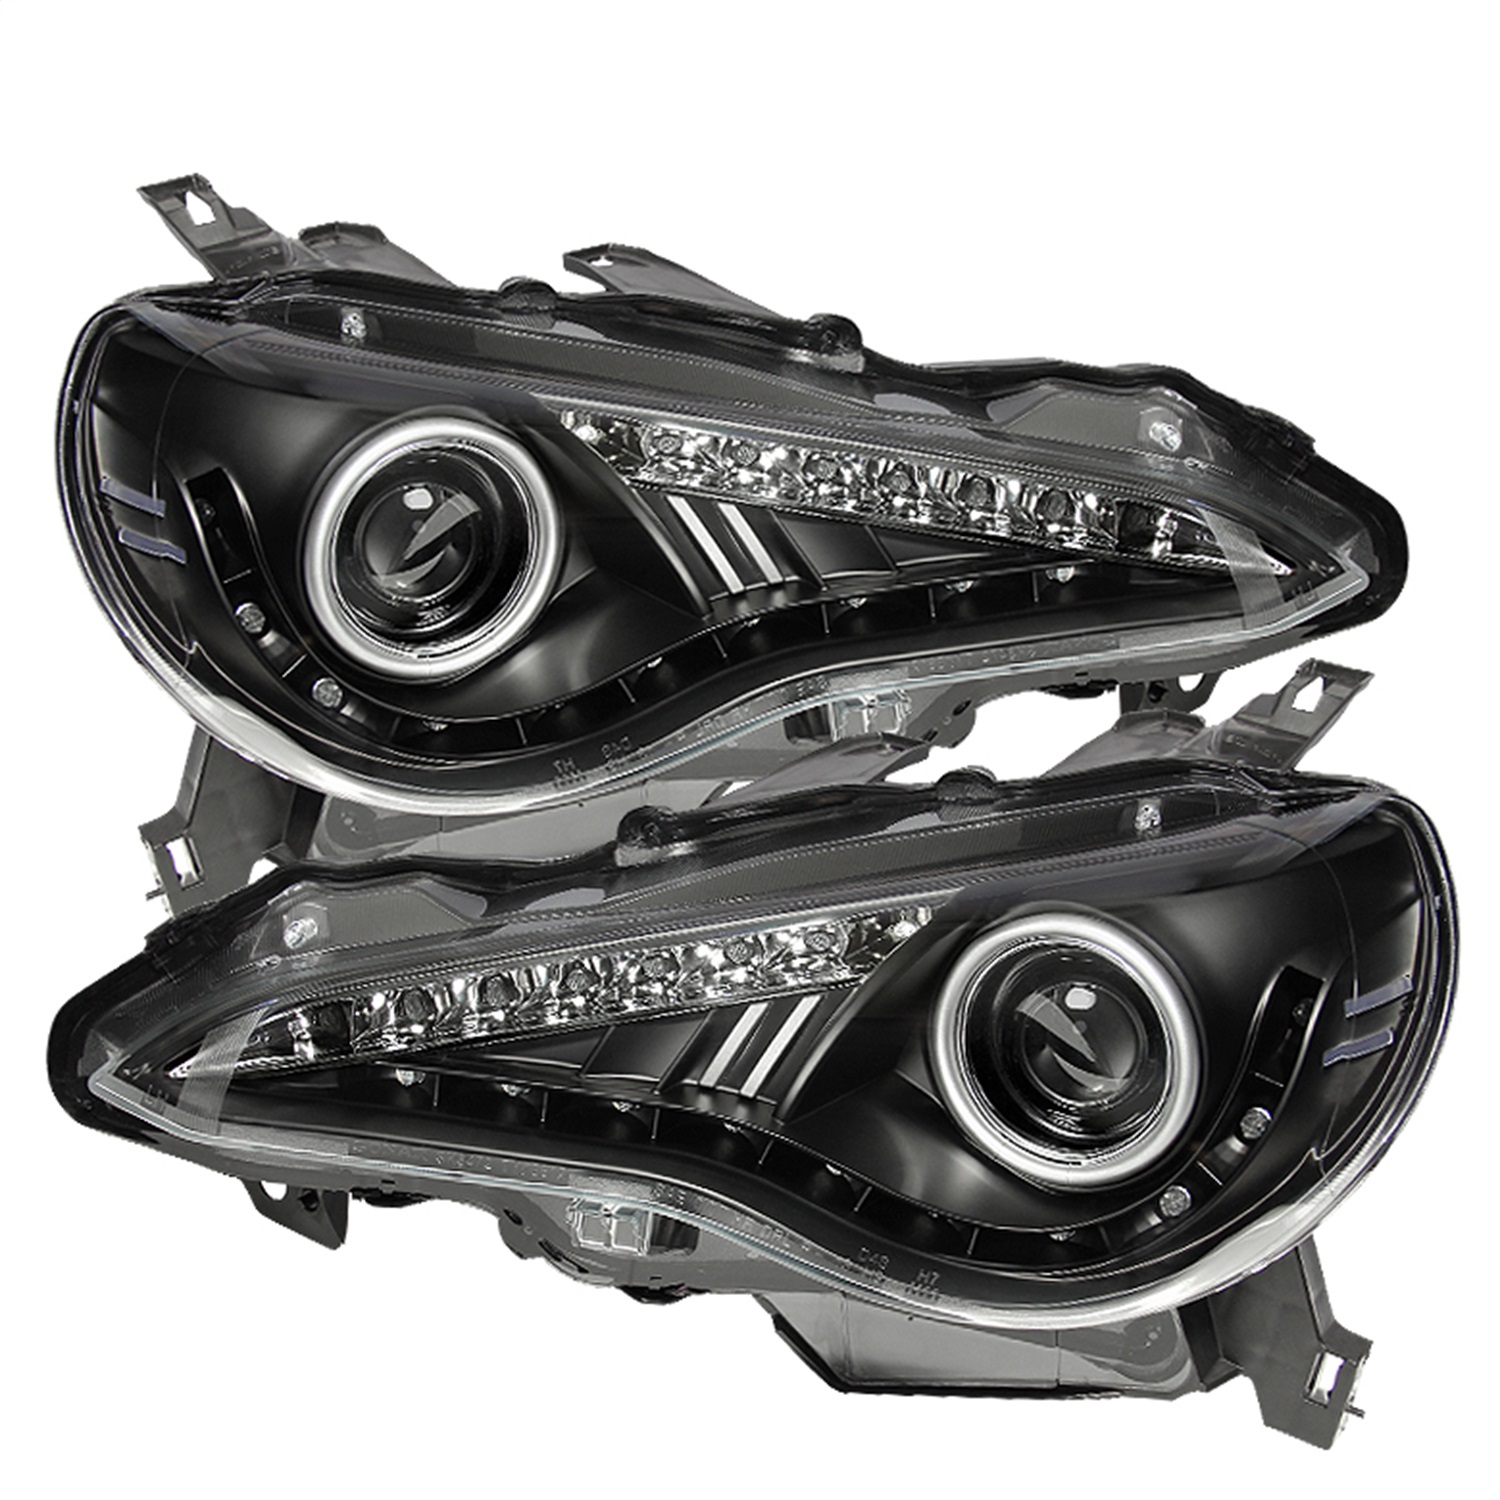 Spyder Auto 5075475 DRL LED Projector Headlights Fits 13-14 BRZ